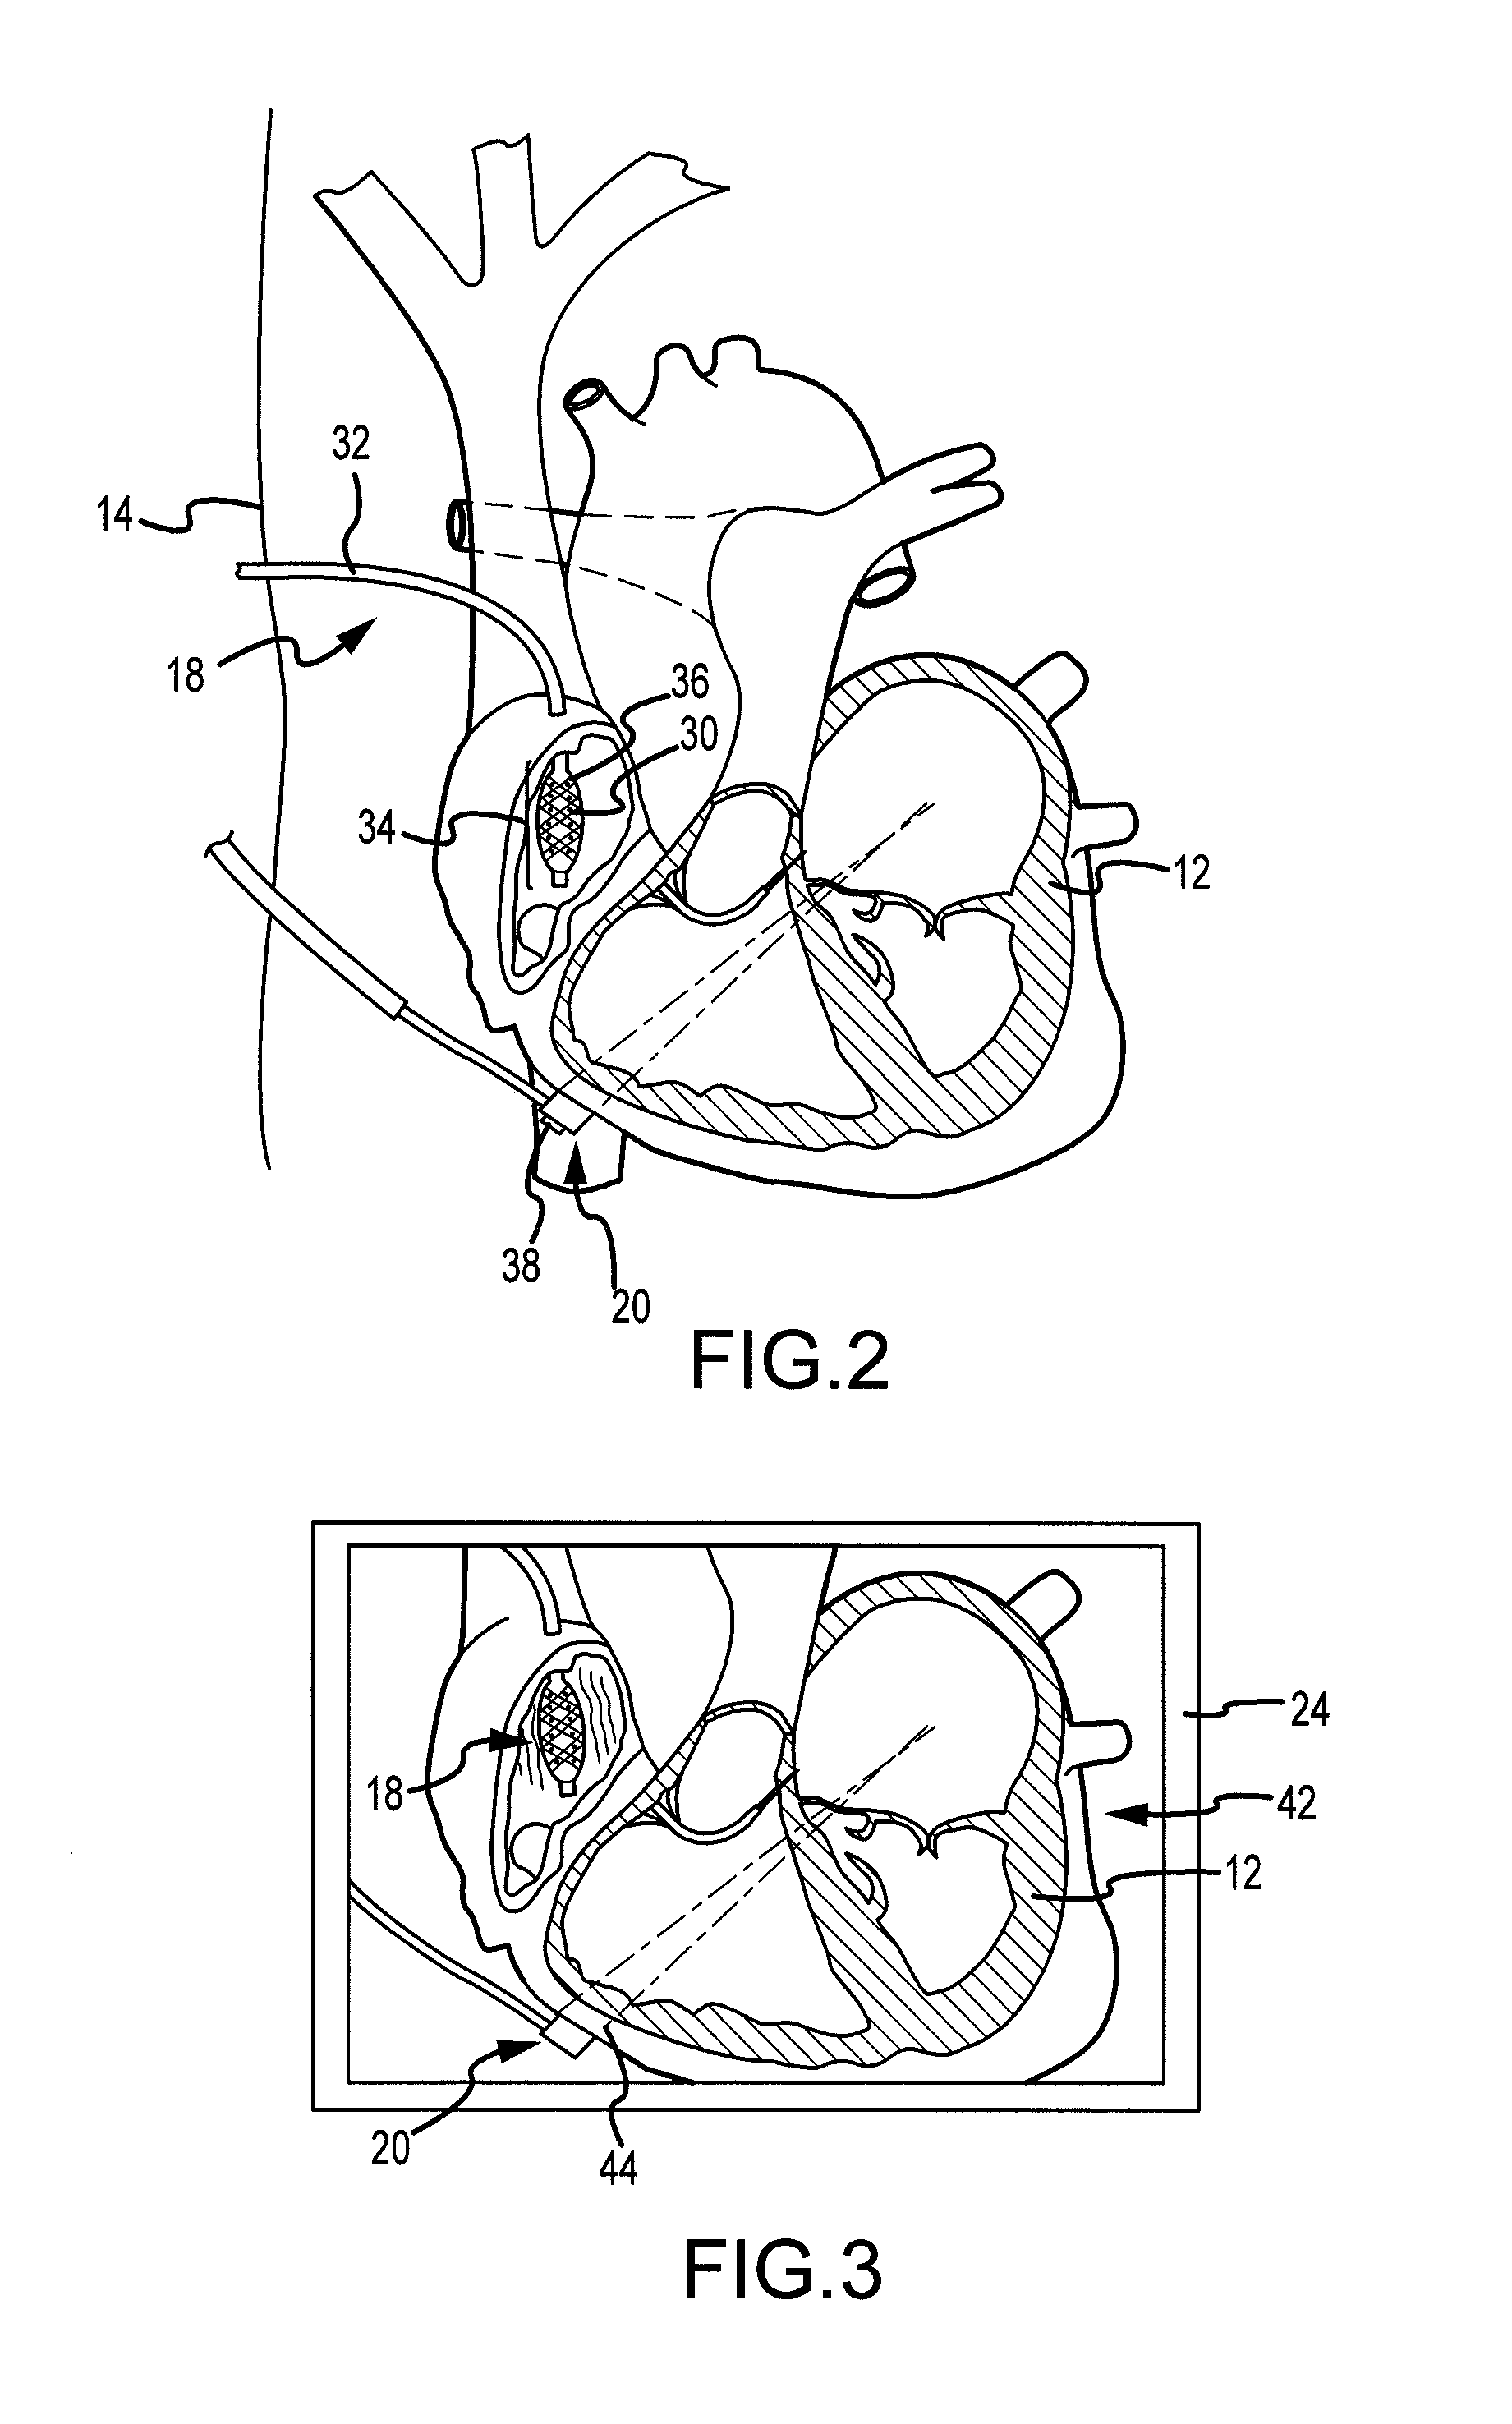 System for displaying data relating to energy emitting treatment devices together with electrophysiological mapping data